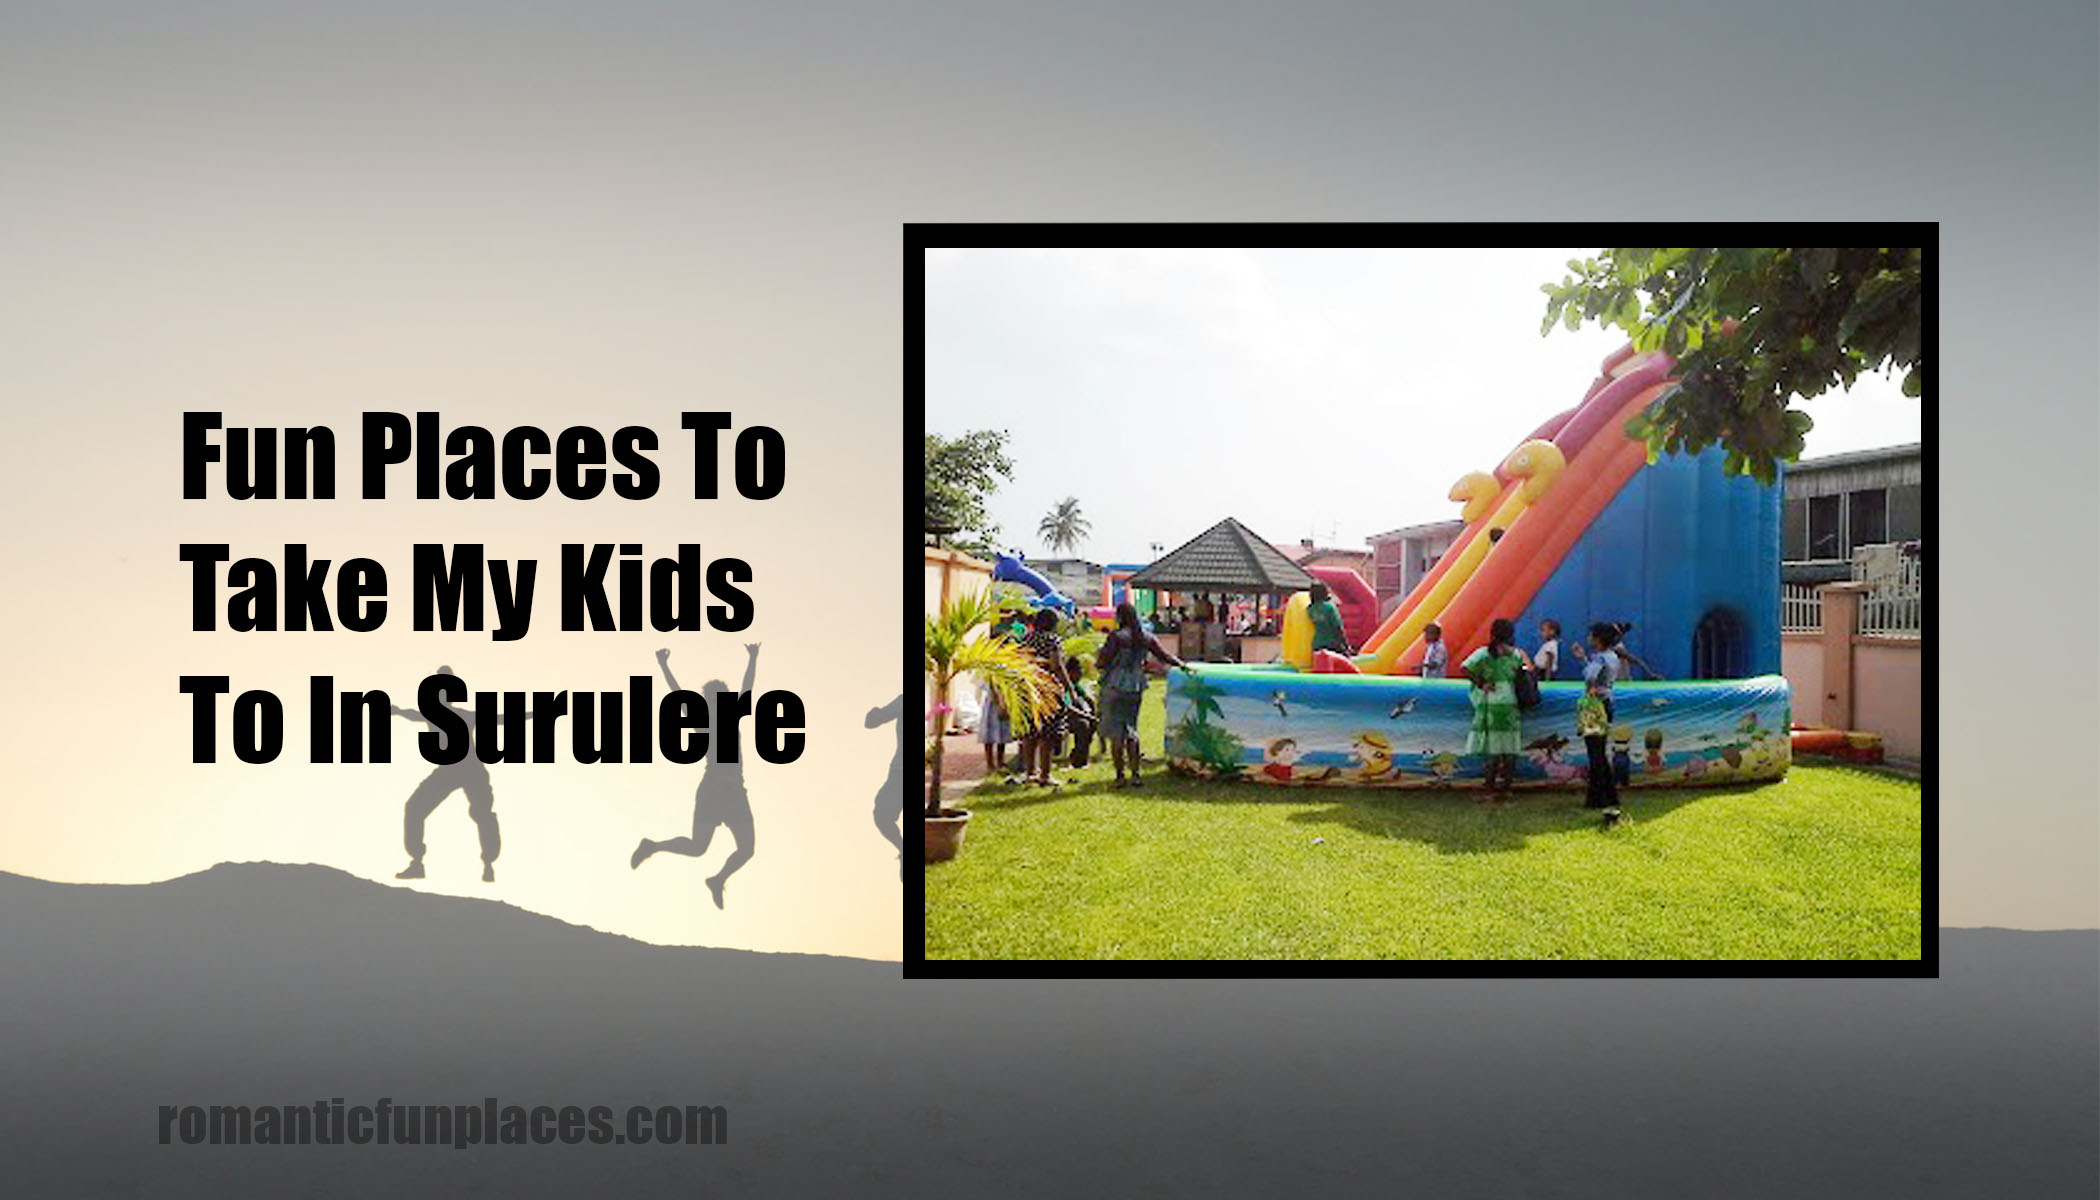 Fun Places To Take My Kids To In Surulere